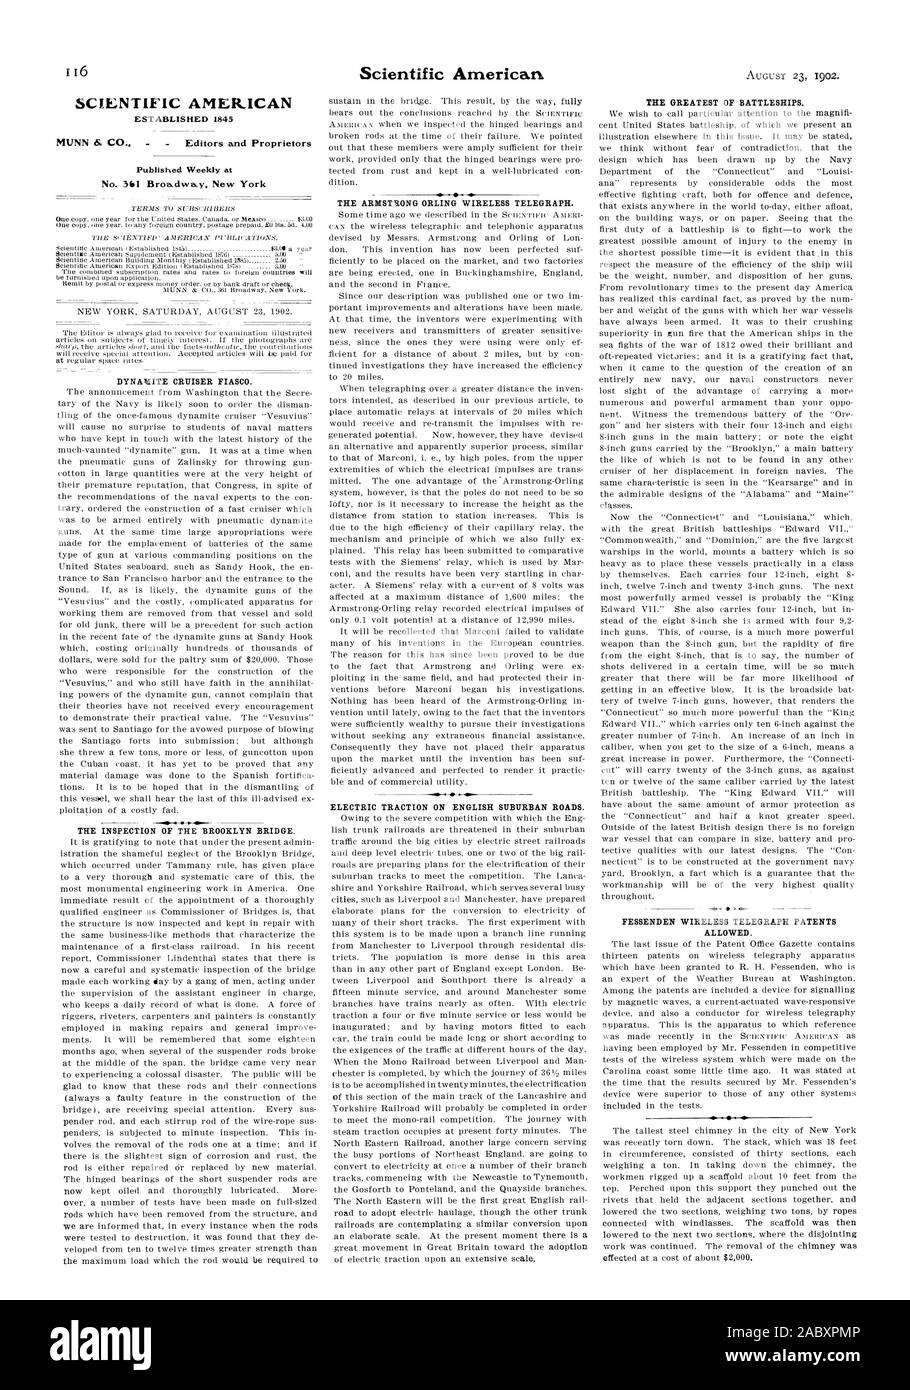 SCIENTIFIC AMERICAN No. 3‘1 Broadway New York DYNAMITE CRUISER FIASCO. THE INSPECTION OF THE BROOKLYN BRIDGE. THE ARMSTRONG ORLING WIRELESS TELEGRAPH.   ELECTRIC TRACTION ON ENGLISH SUBURBAN ROADS. THE GREATEST OF BATTLESHIPS. FESSENDEN WIRELESS TELEGRAPH PATENTS ALLOWED., 1902-08-23 Stock Photo